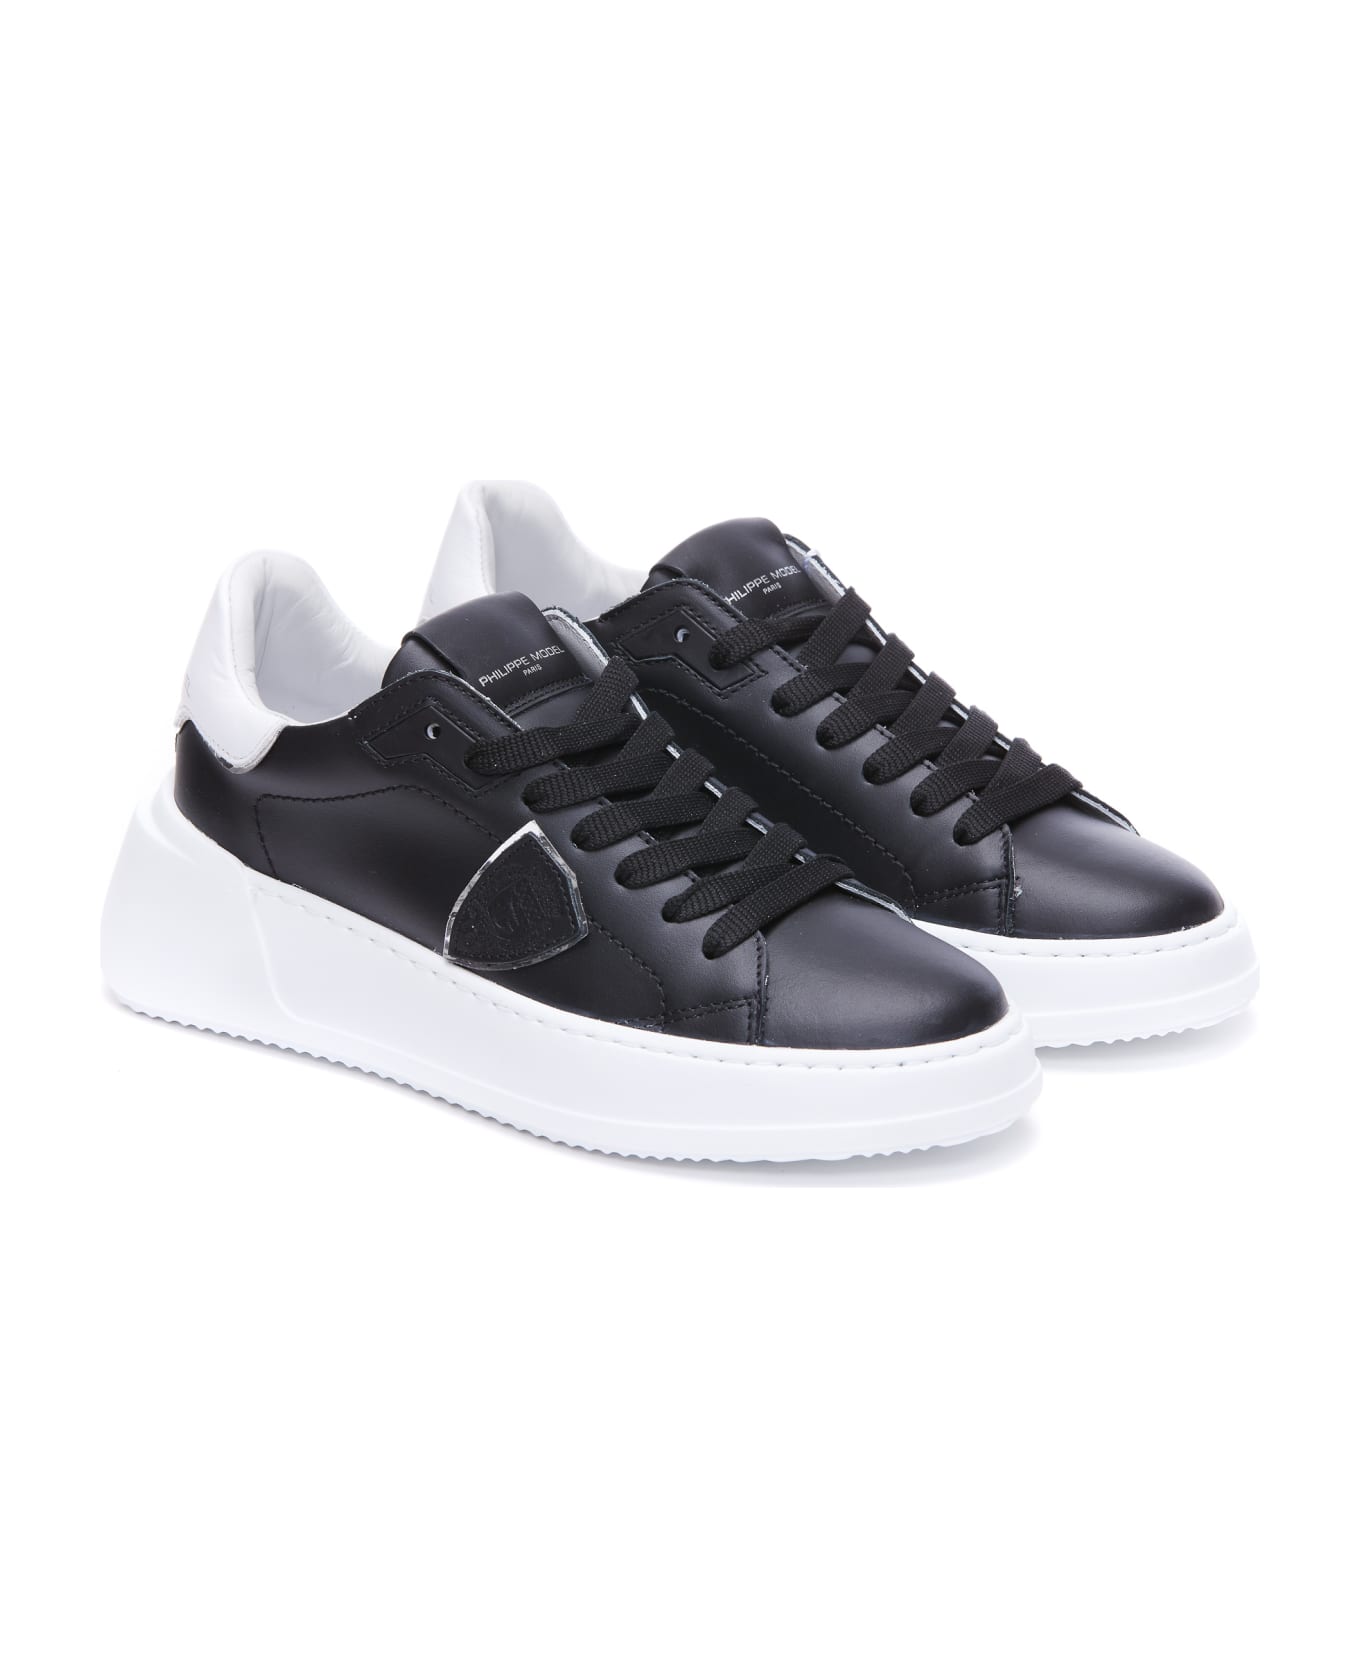 Philippe Model Tres Temple Low Sneakers - Black ウェッジシューズ